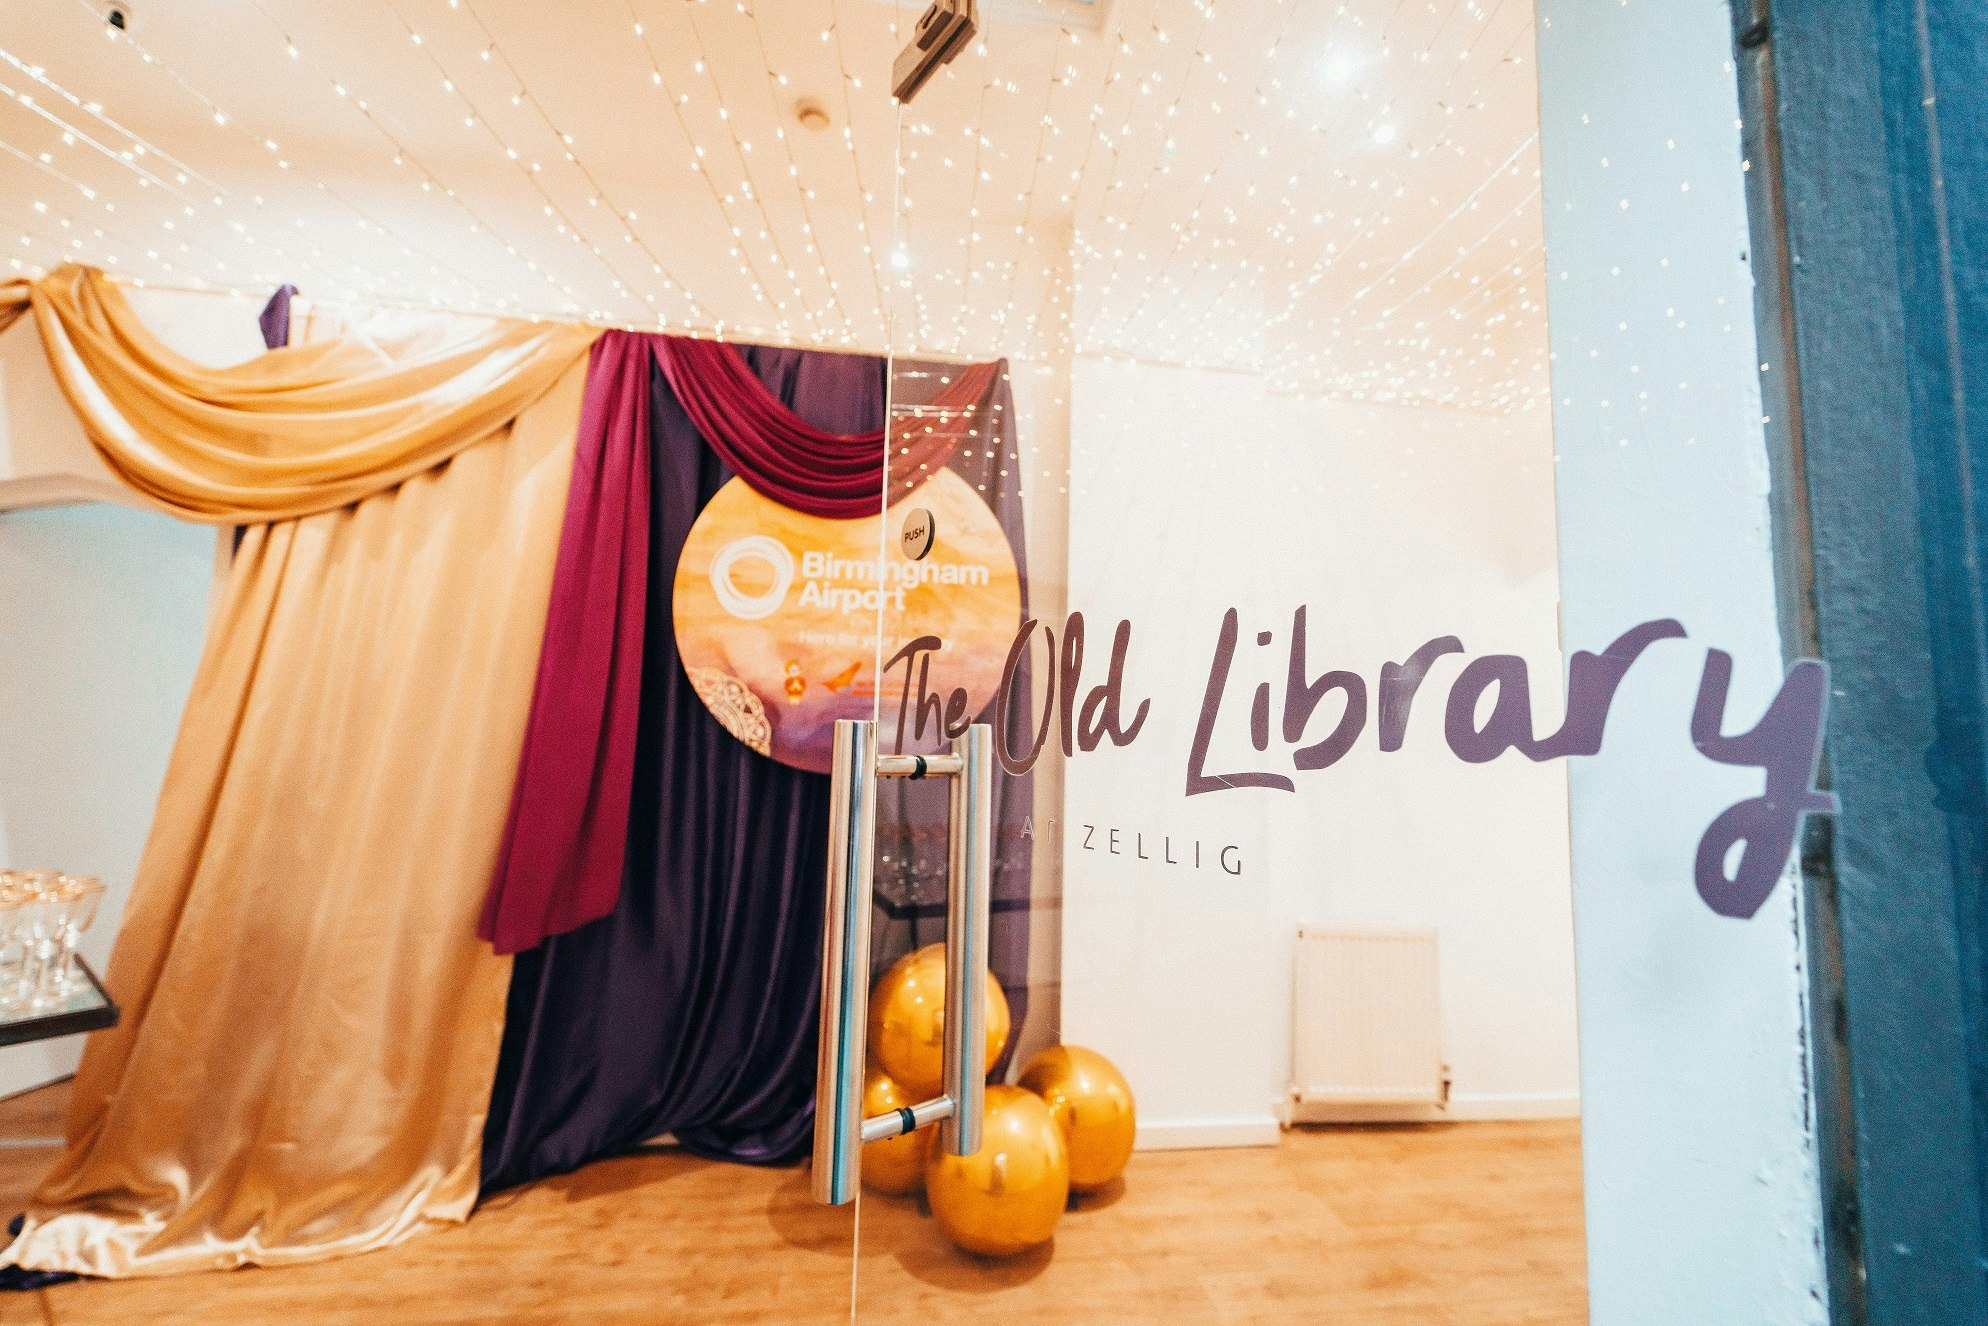 Graduation Party Venues in Birmingham - The Old Library